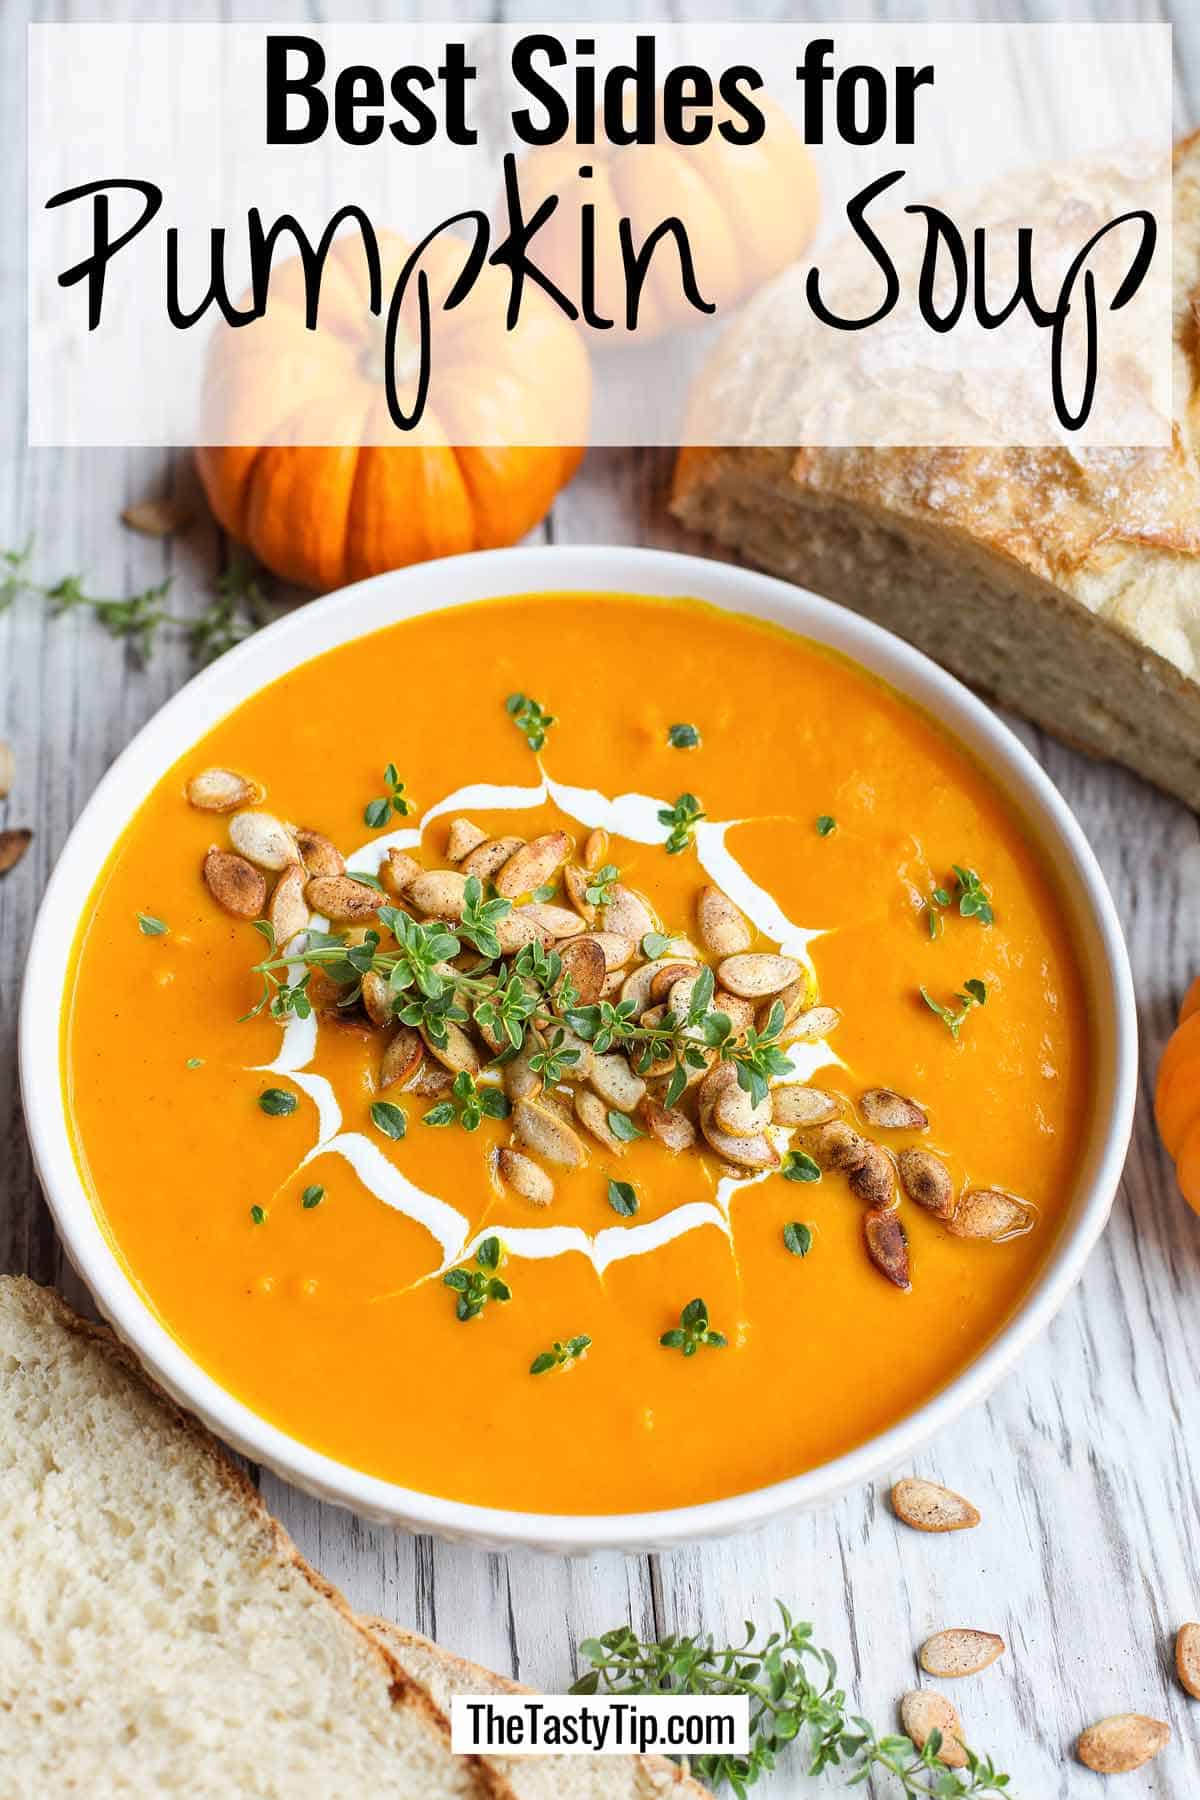 Bowl of pumpkin soup garnished with greens and roasted pumpkin seeds. Crusty bread and small decorative pumpkins in the background. Overlay with words "Best sides for pumpkin soup".